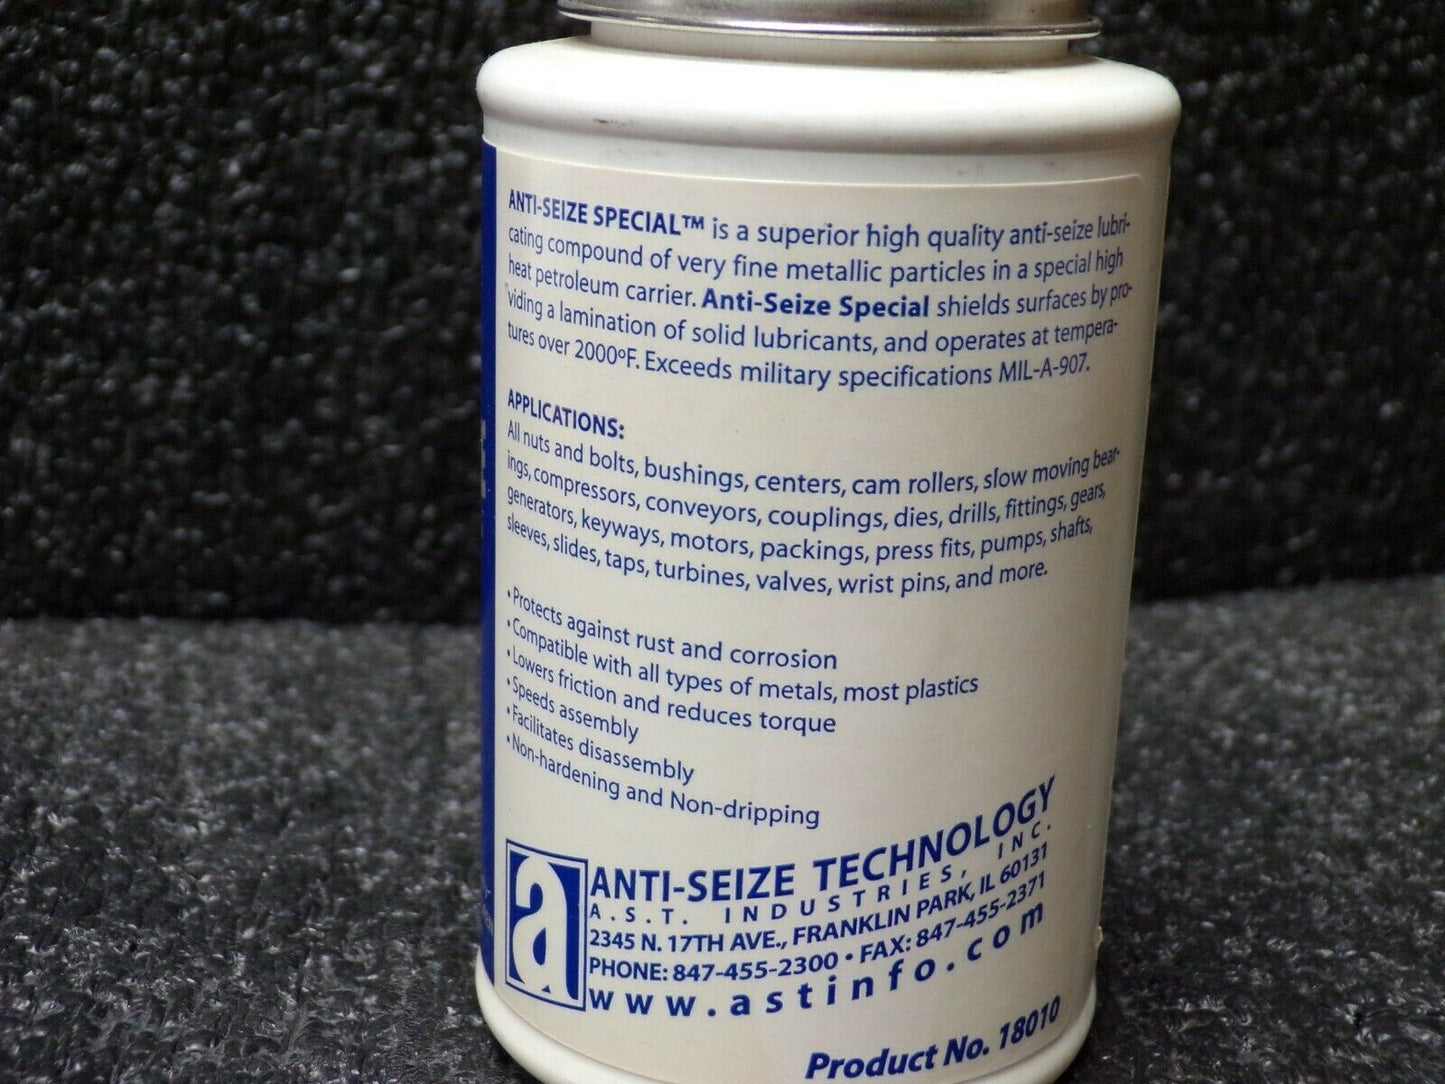 Anti-Seize Special Lubricating Compound, 8oz Brush Top Can, (183918035149-X03)